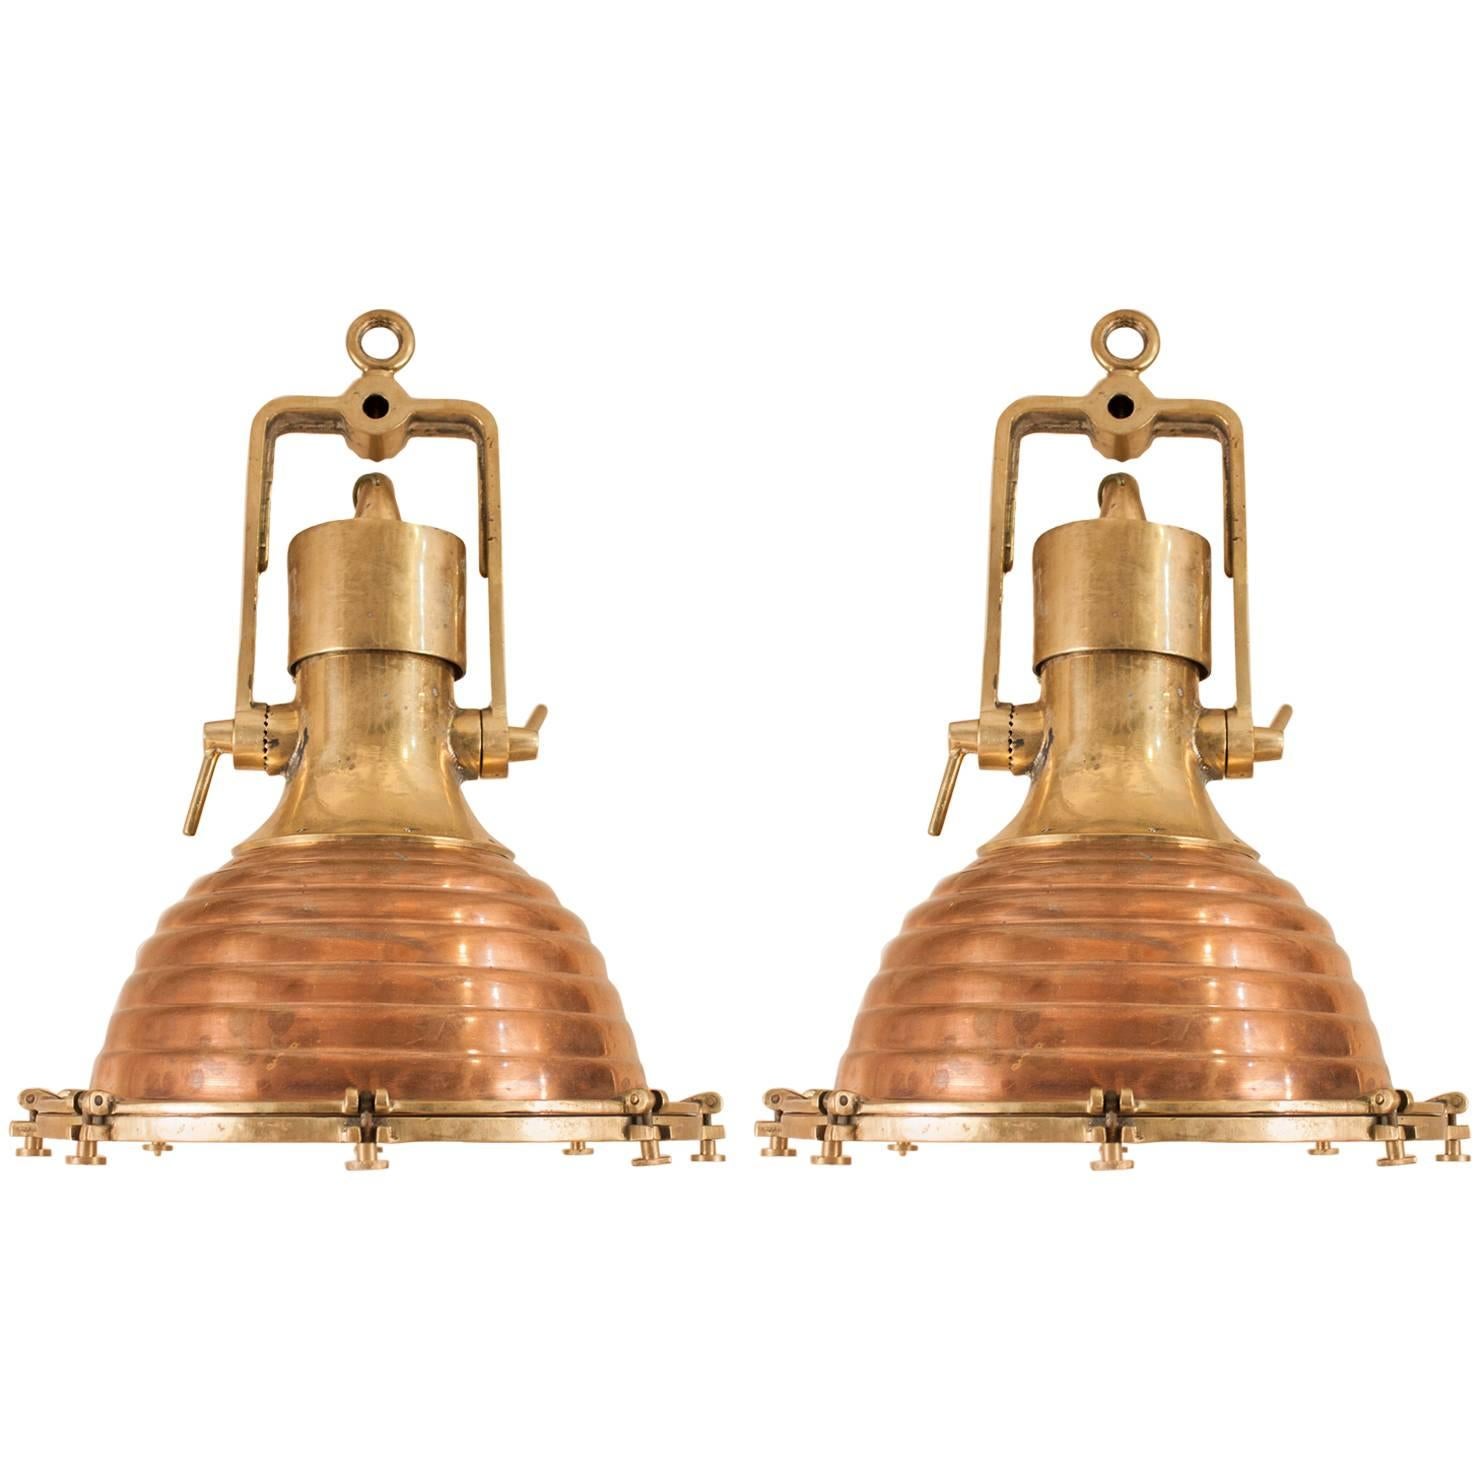 Pair of Large Copper and Brass Nautical Ship Deck Lights